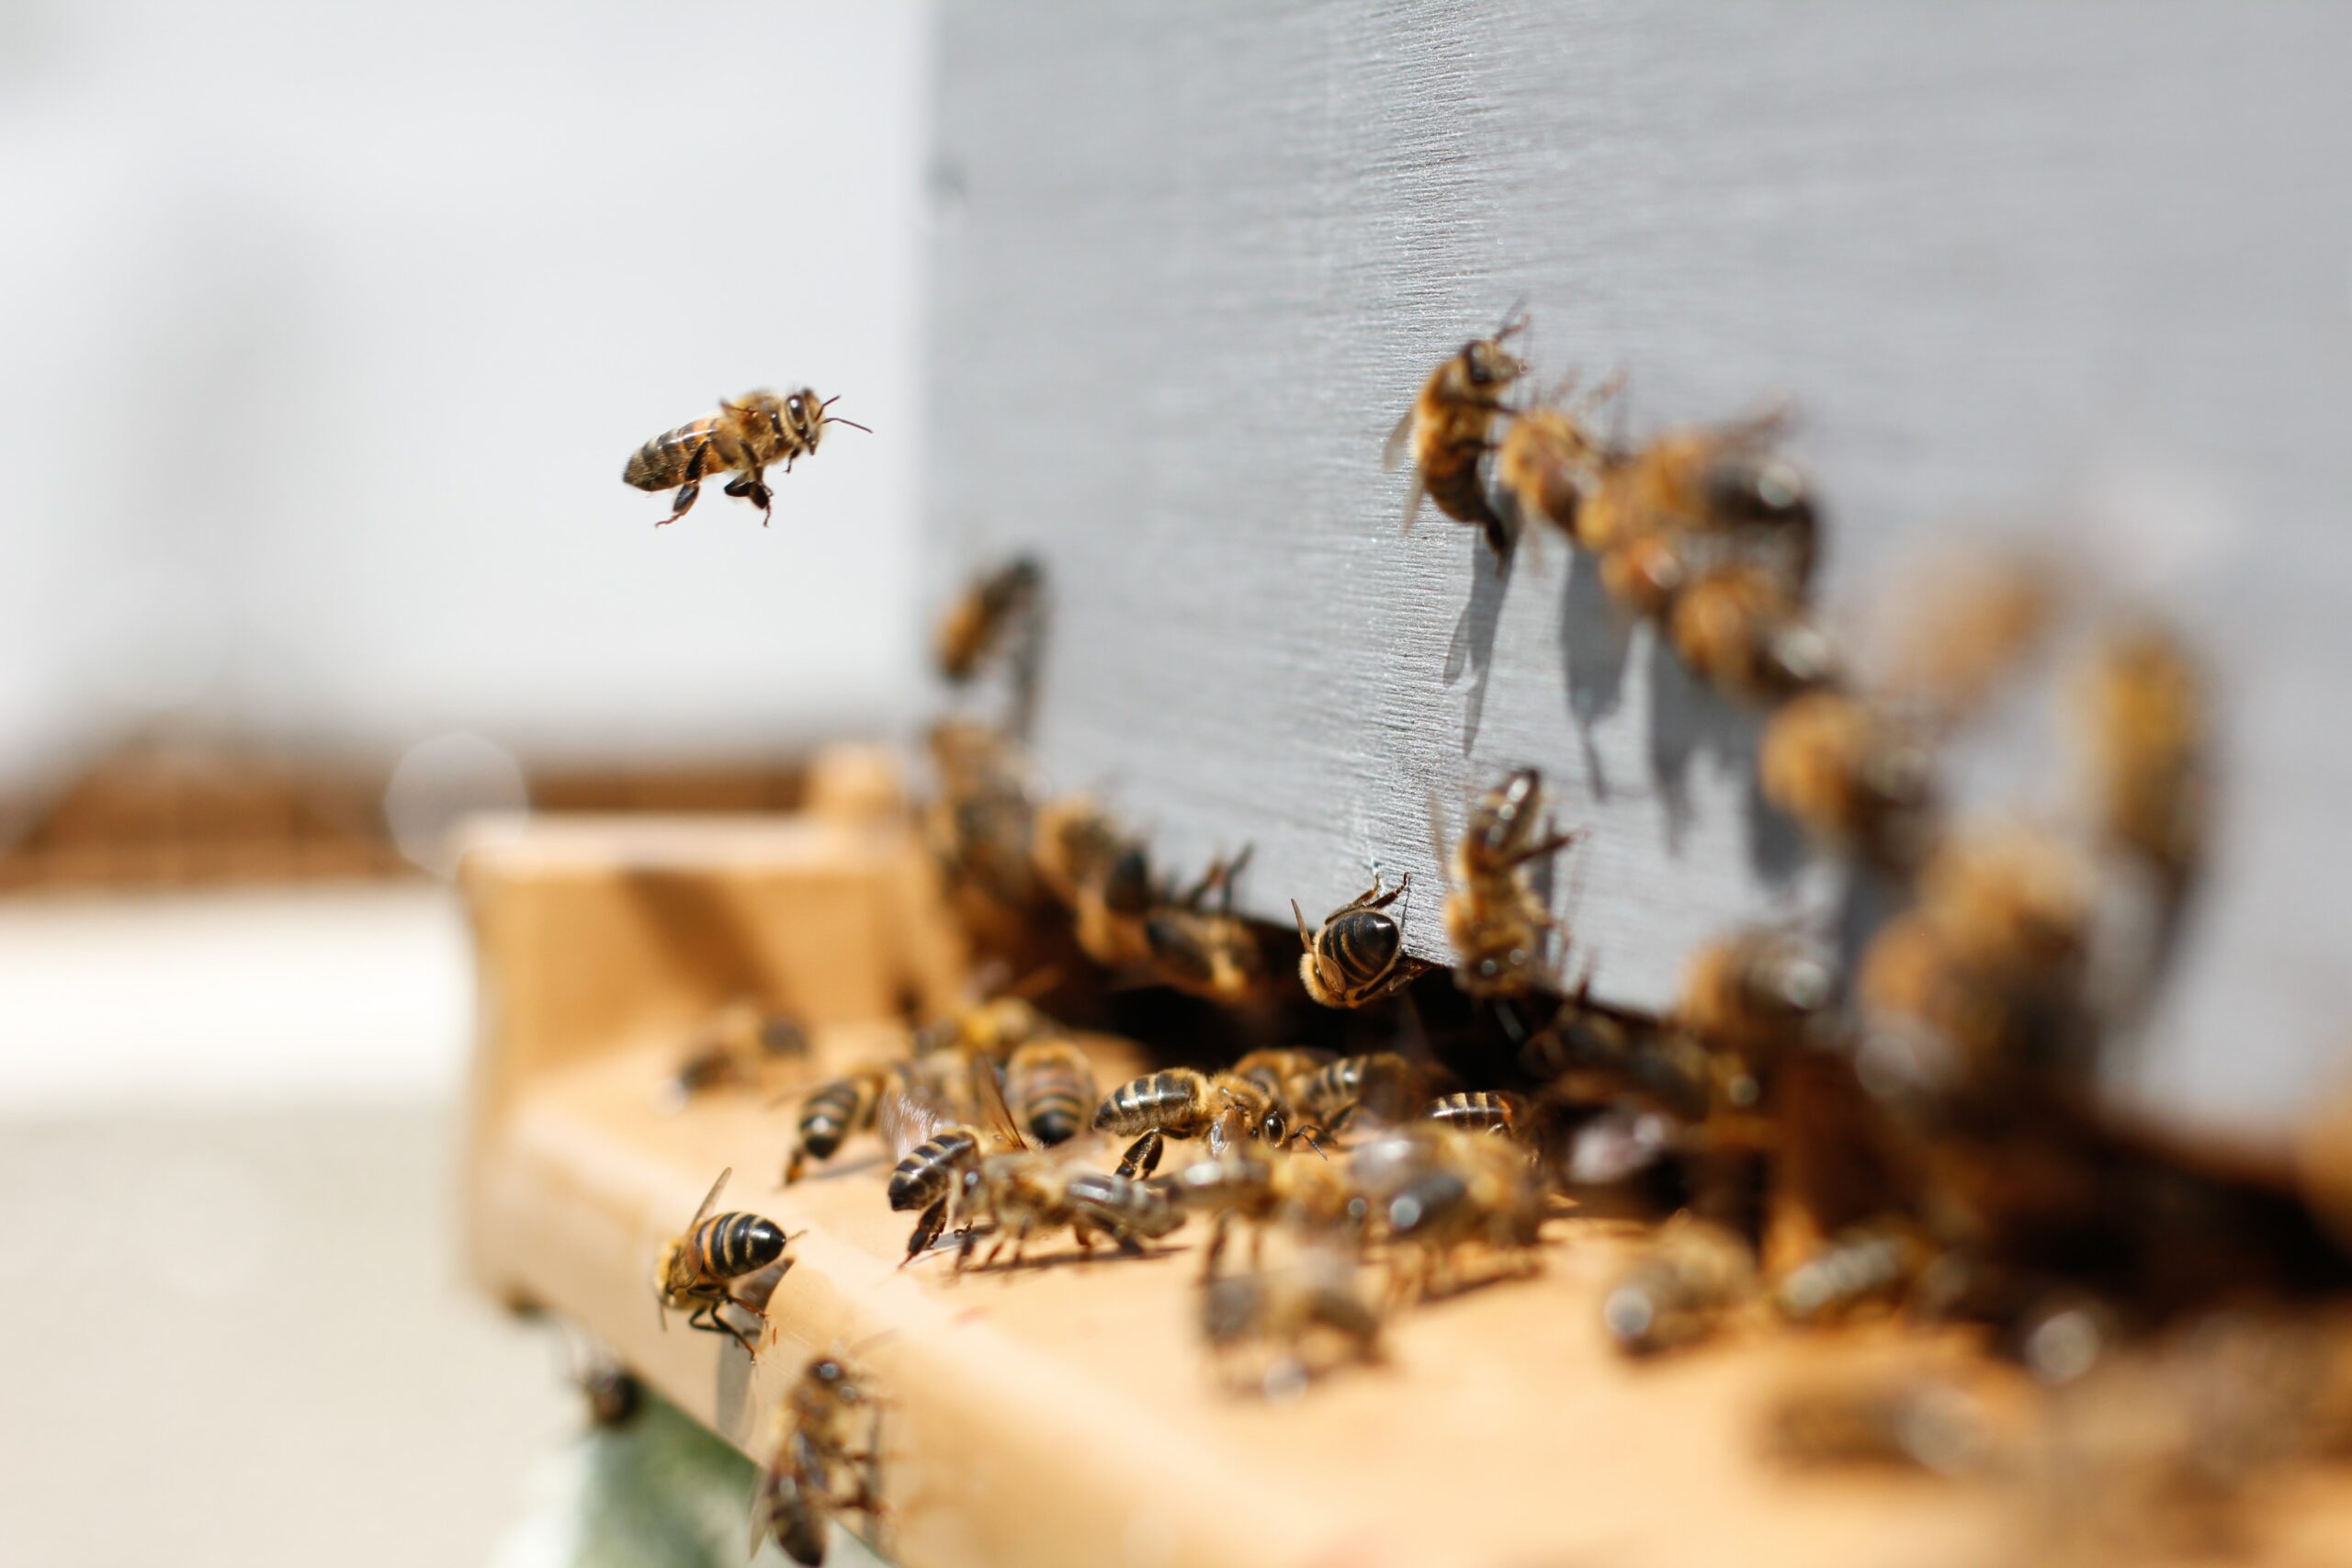 The photo is of a bee hive where multiple honey bees are entering and exiting a beekeeper box.